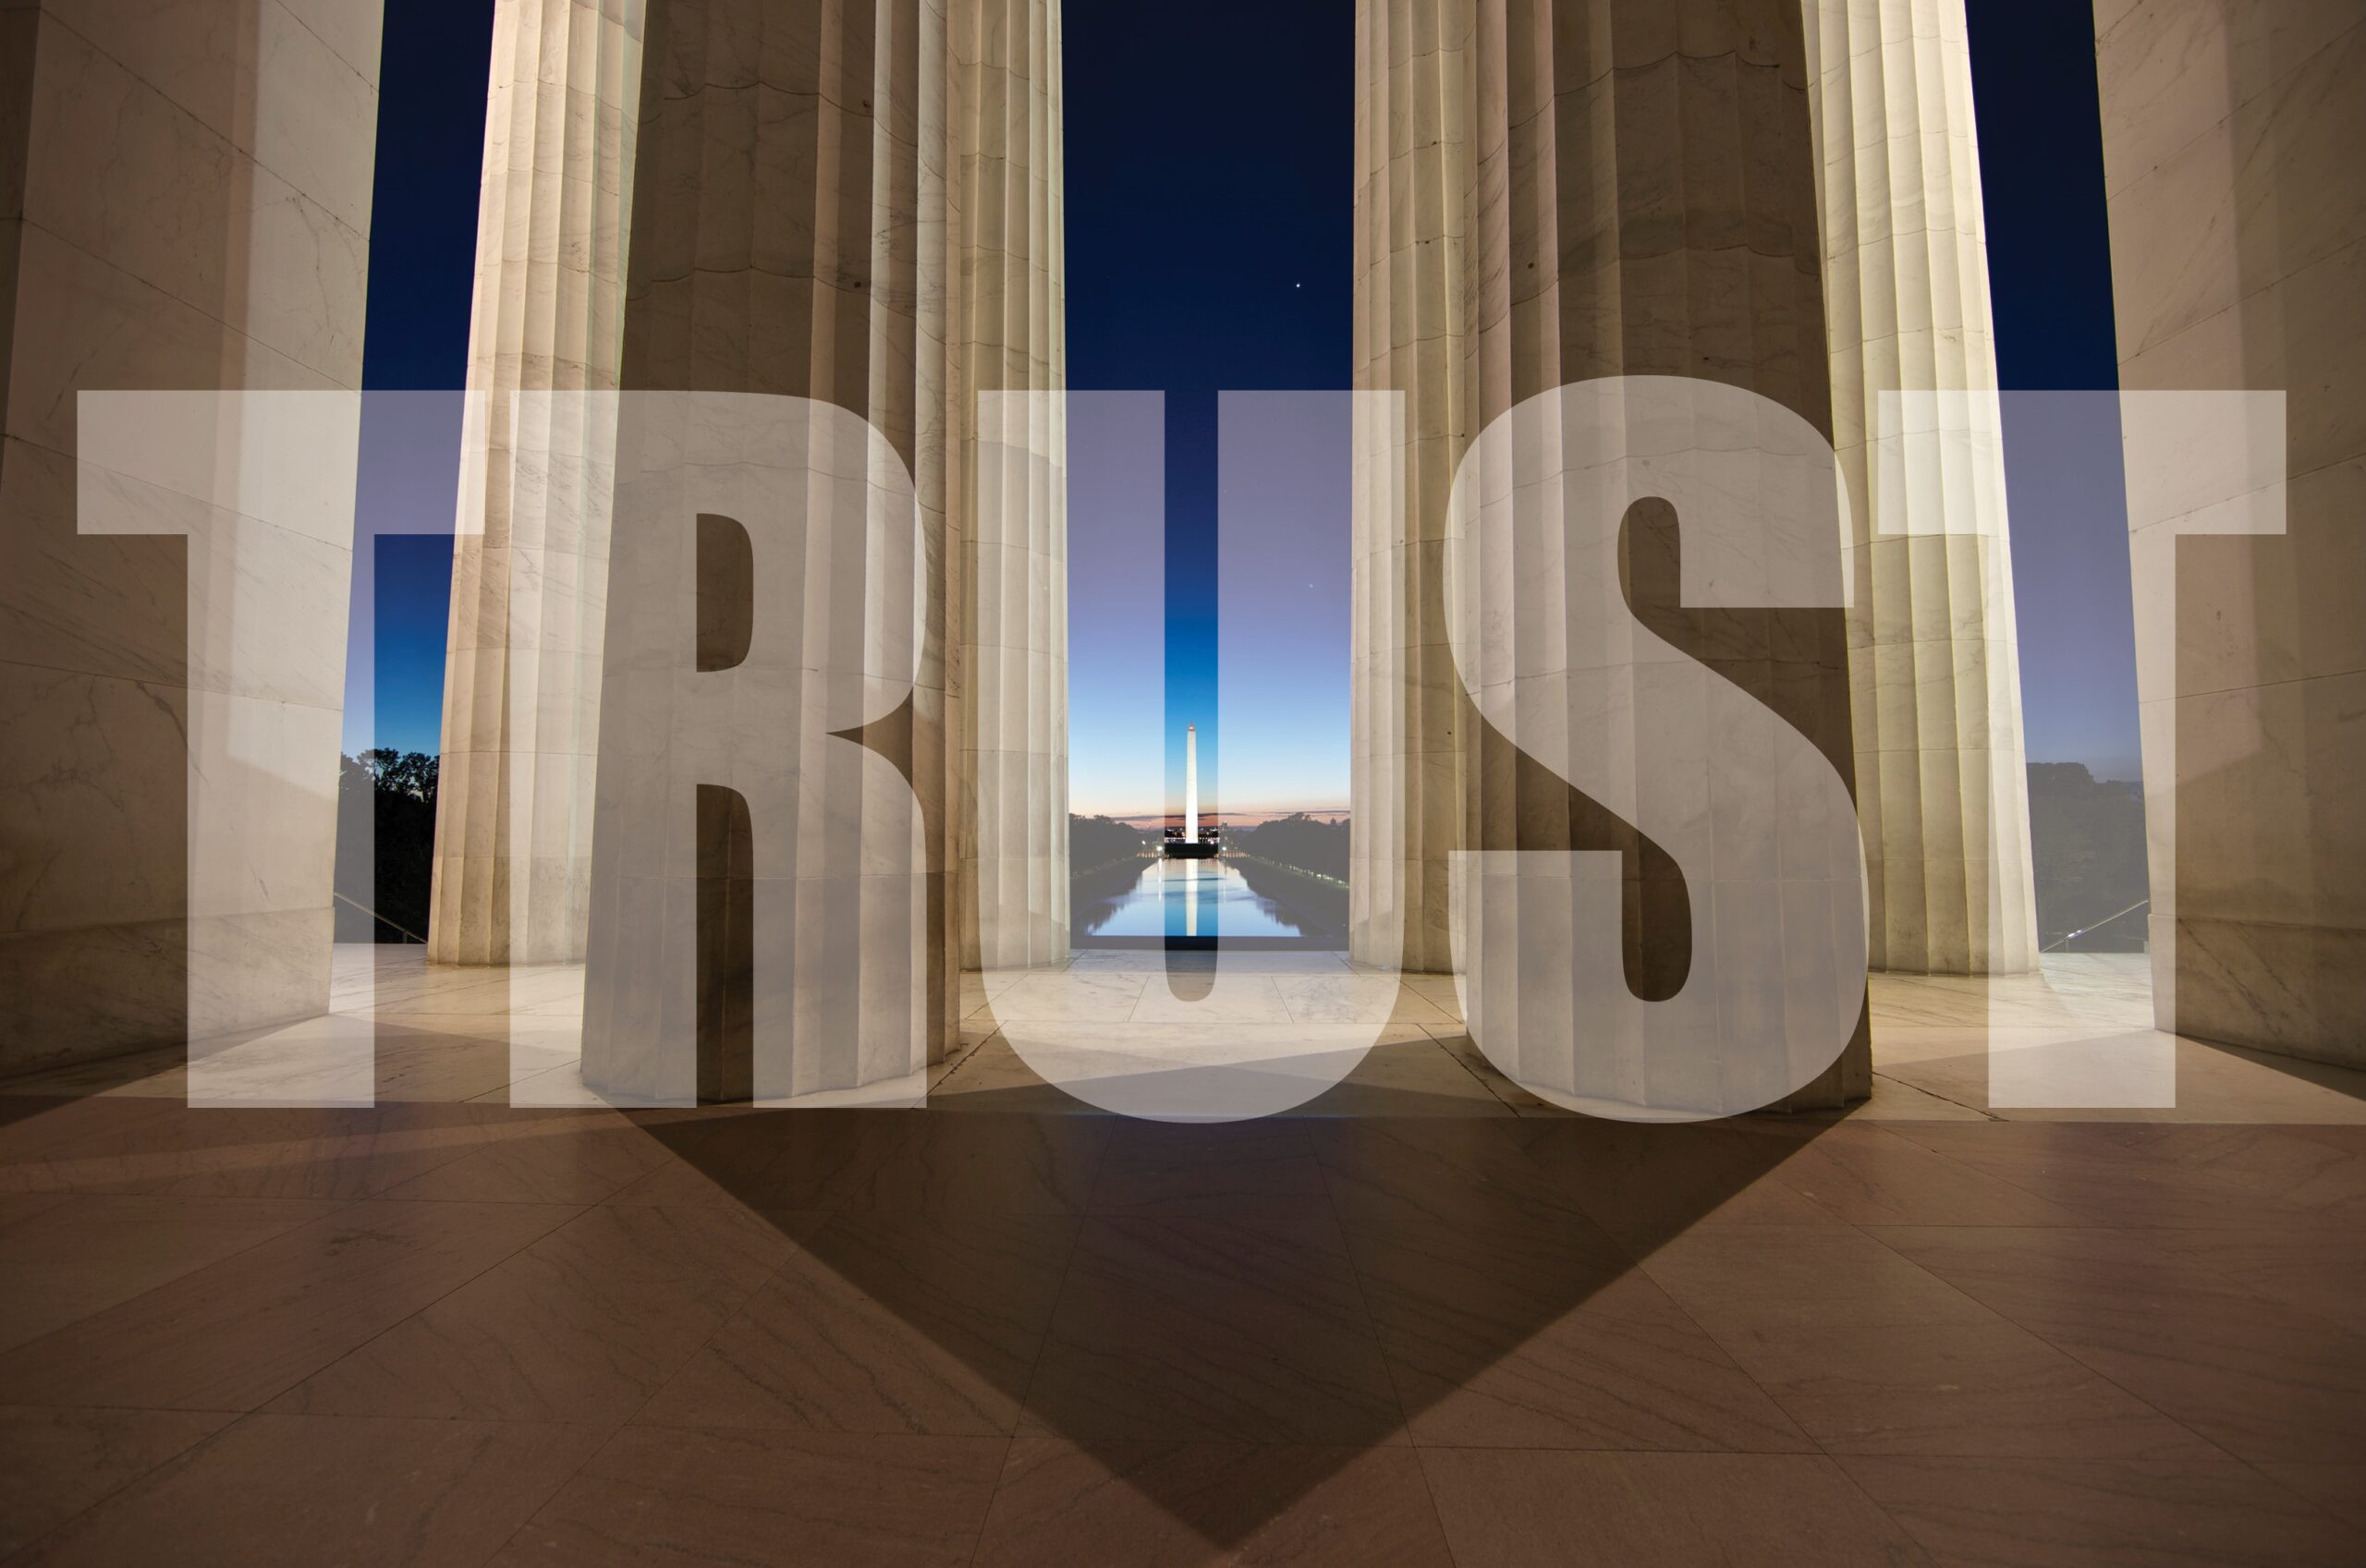 TRUST IN GOVERNMENT: Latest Ripon Forum looks at why it’s important, and what Republicans can do to restore it in 2015